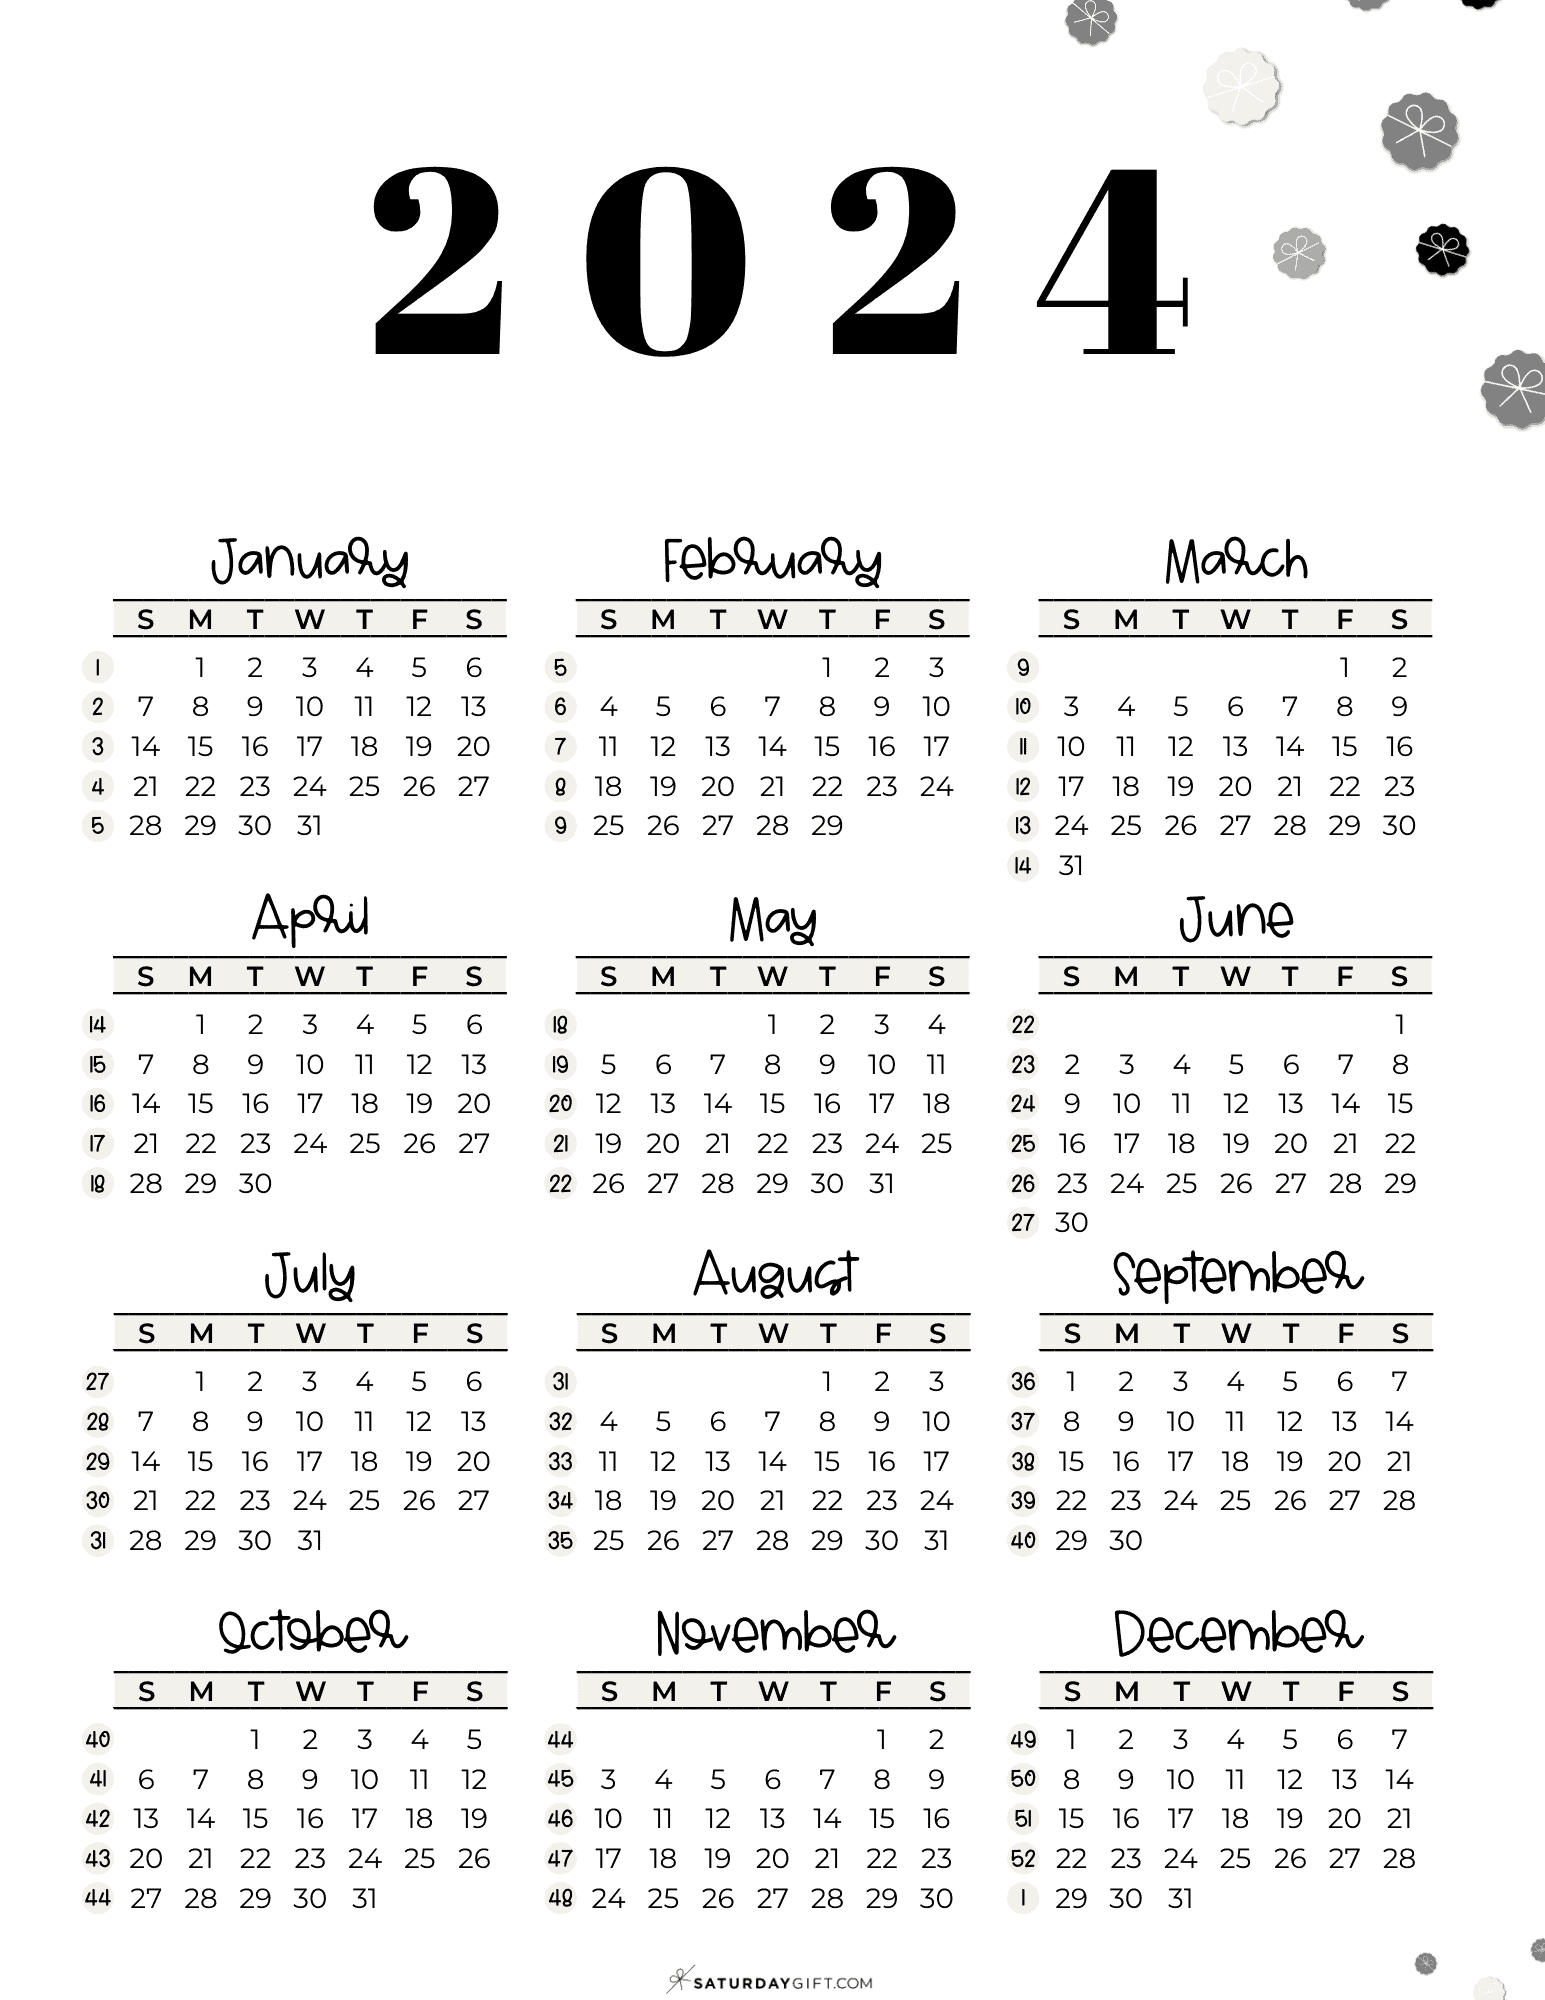 Day Numbers For 2024 - What Day Is It? | Annual Calendar 2024